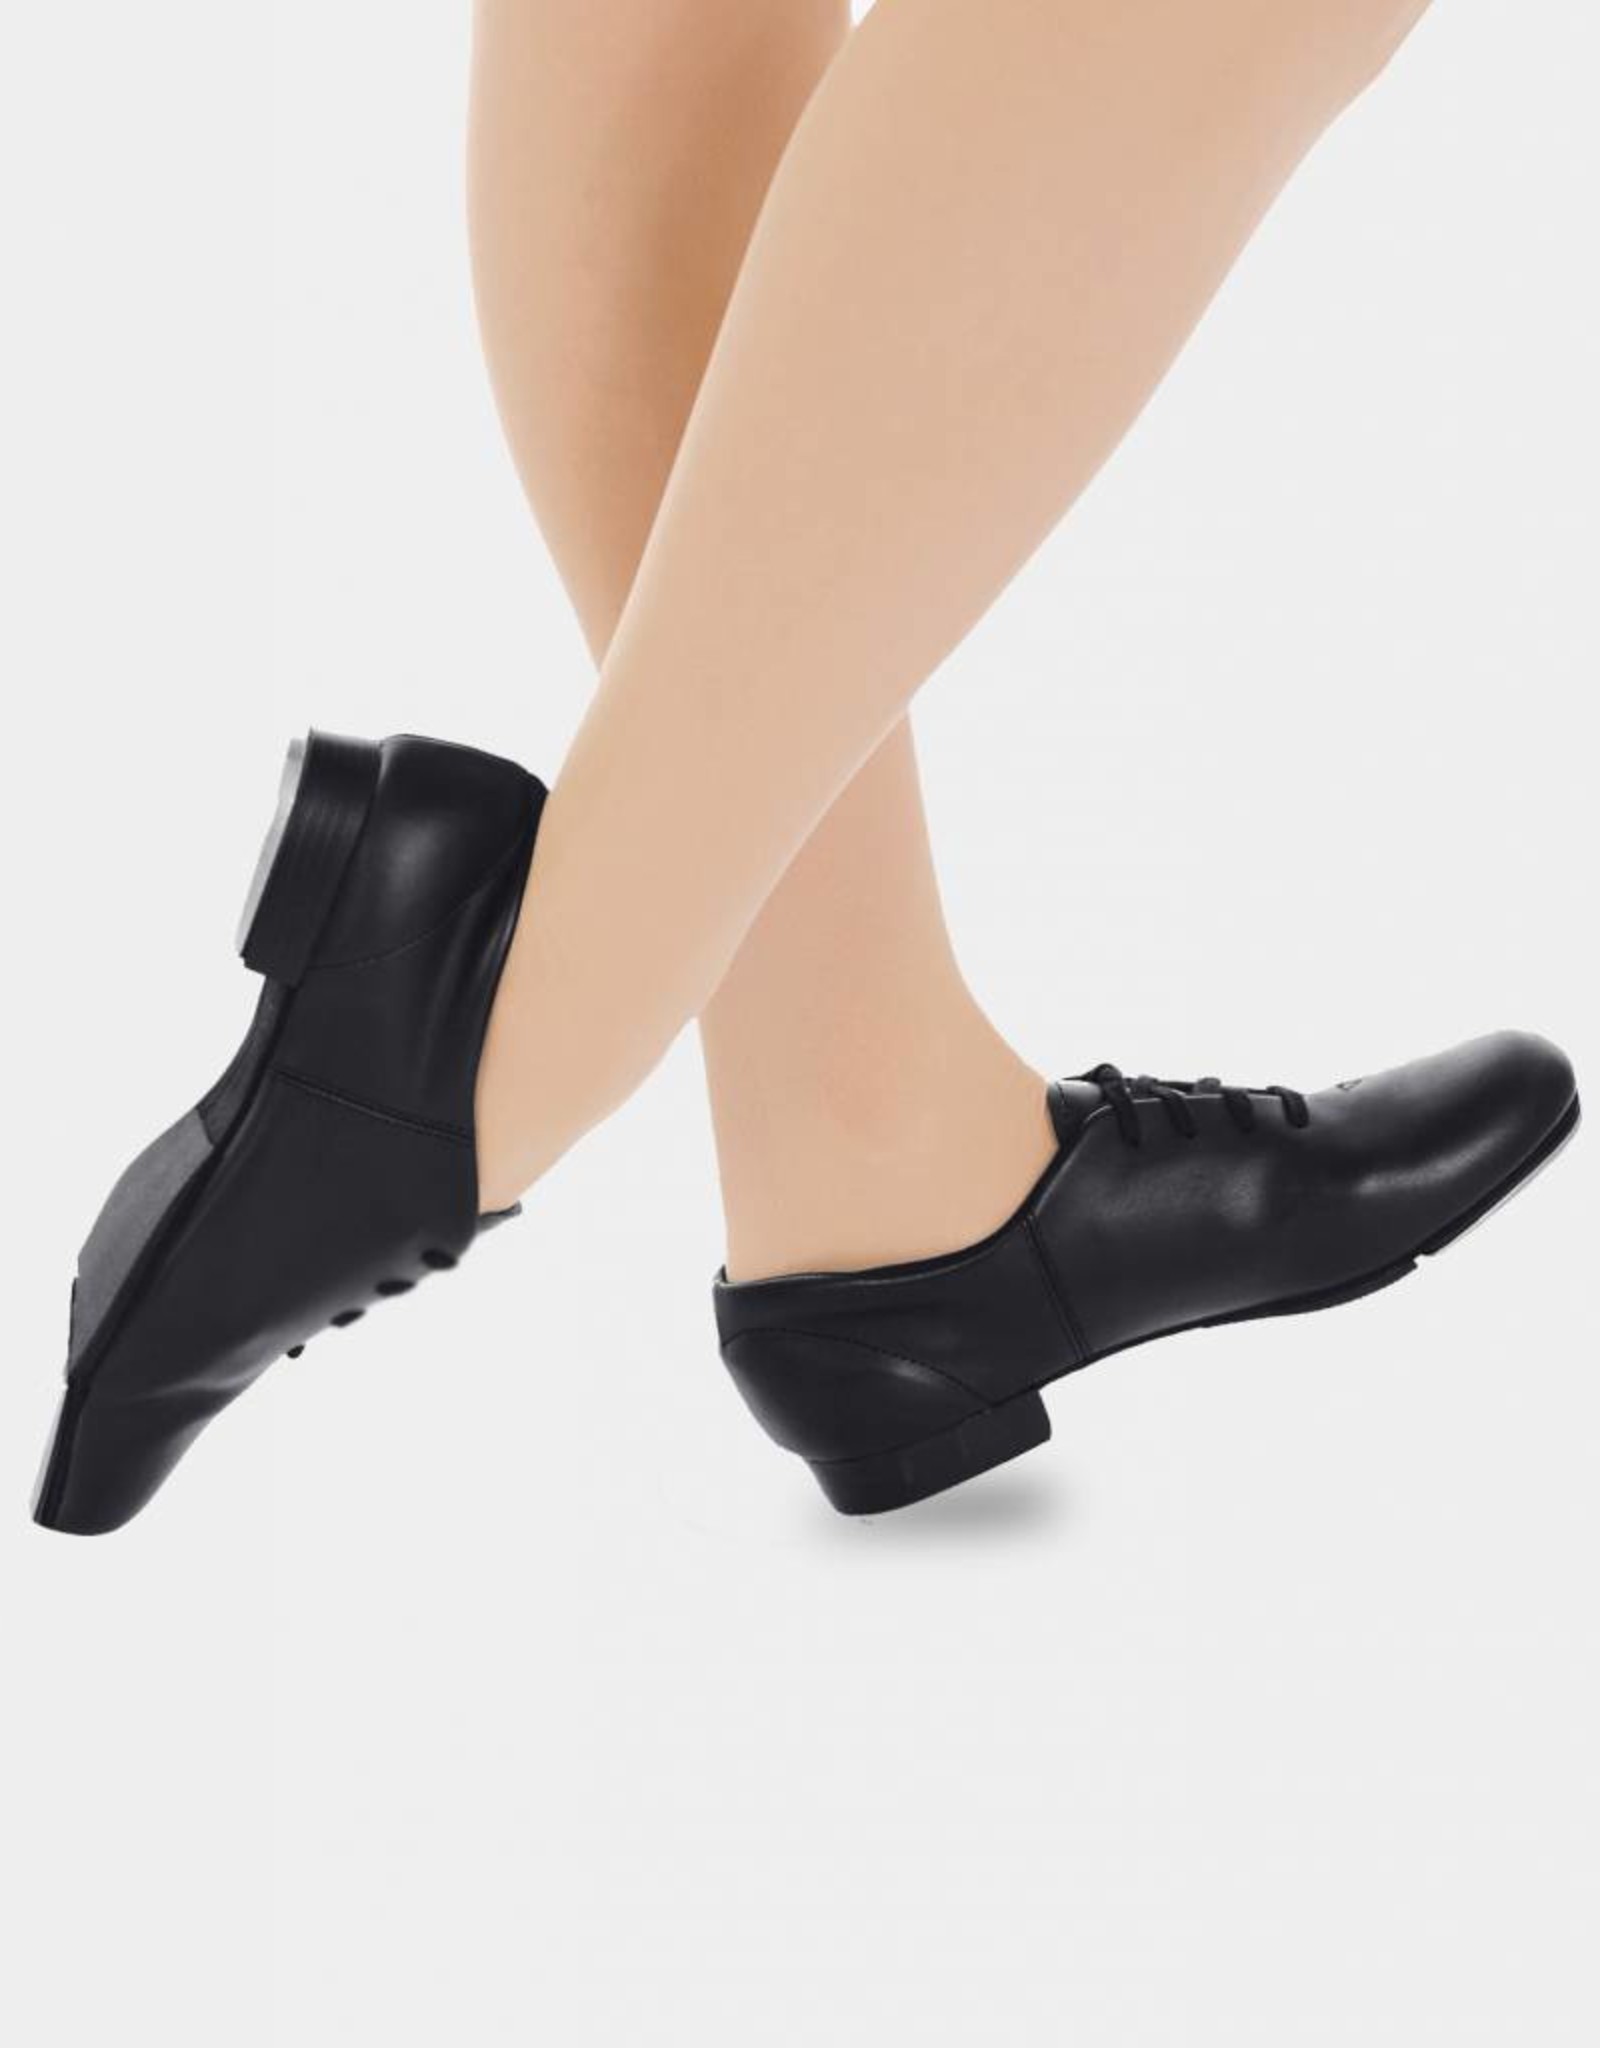 CADENCE TAP SHOES-CHILD - DANZ